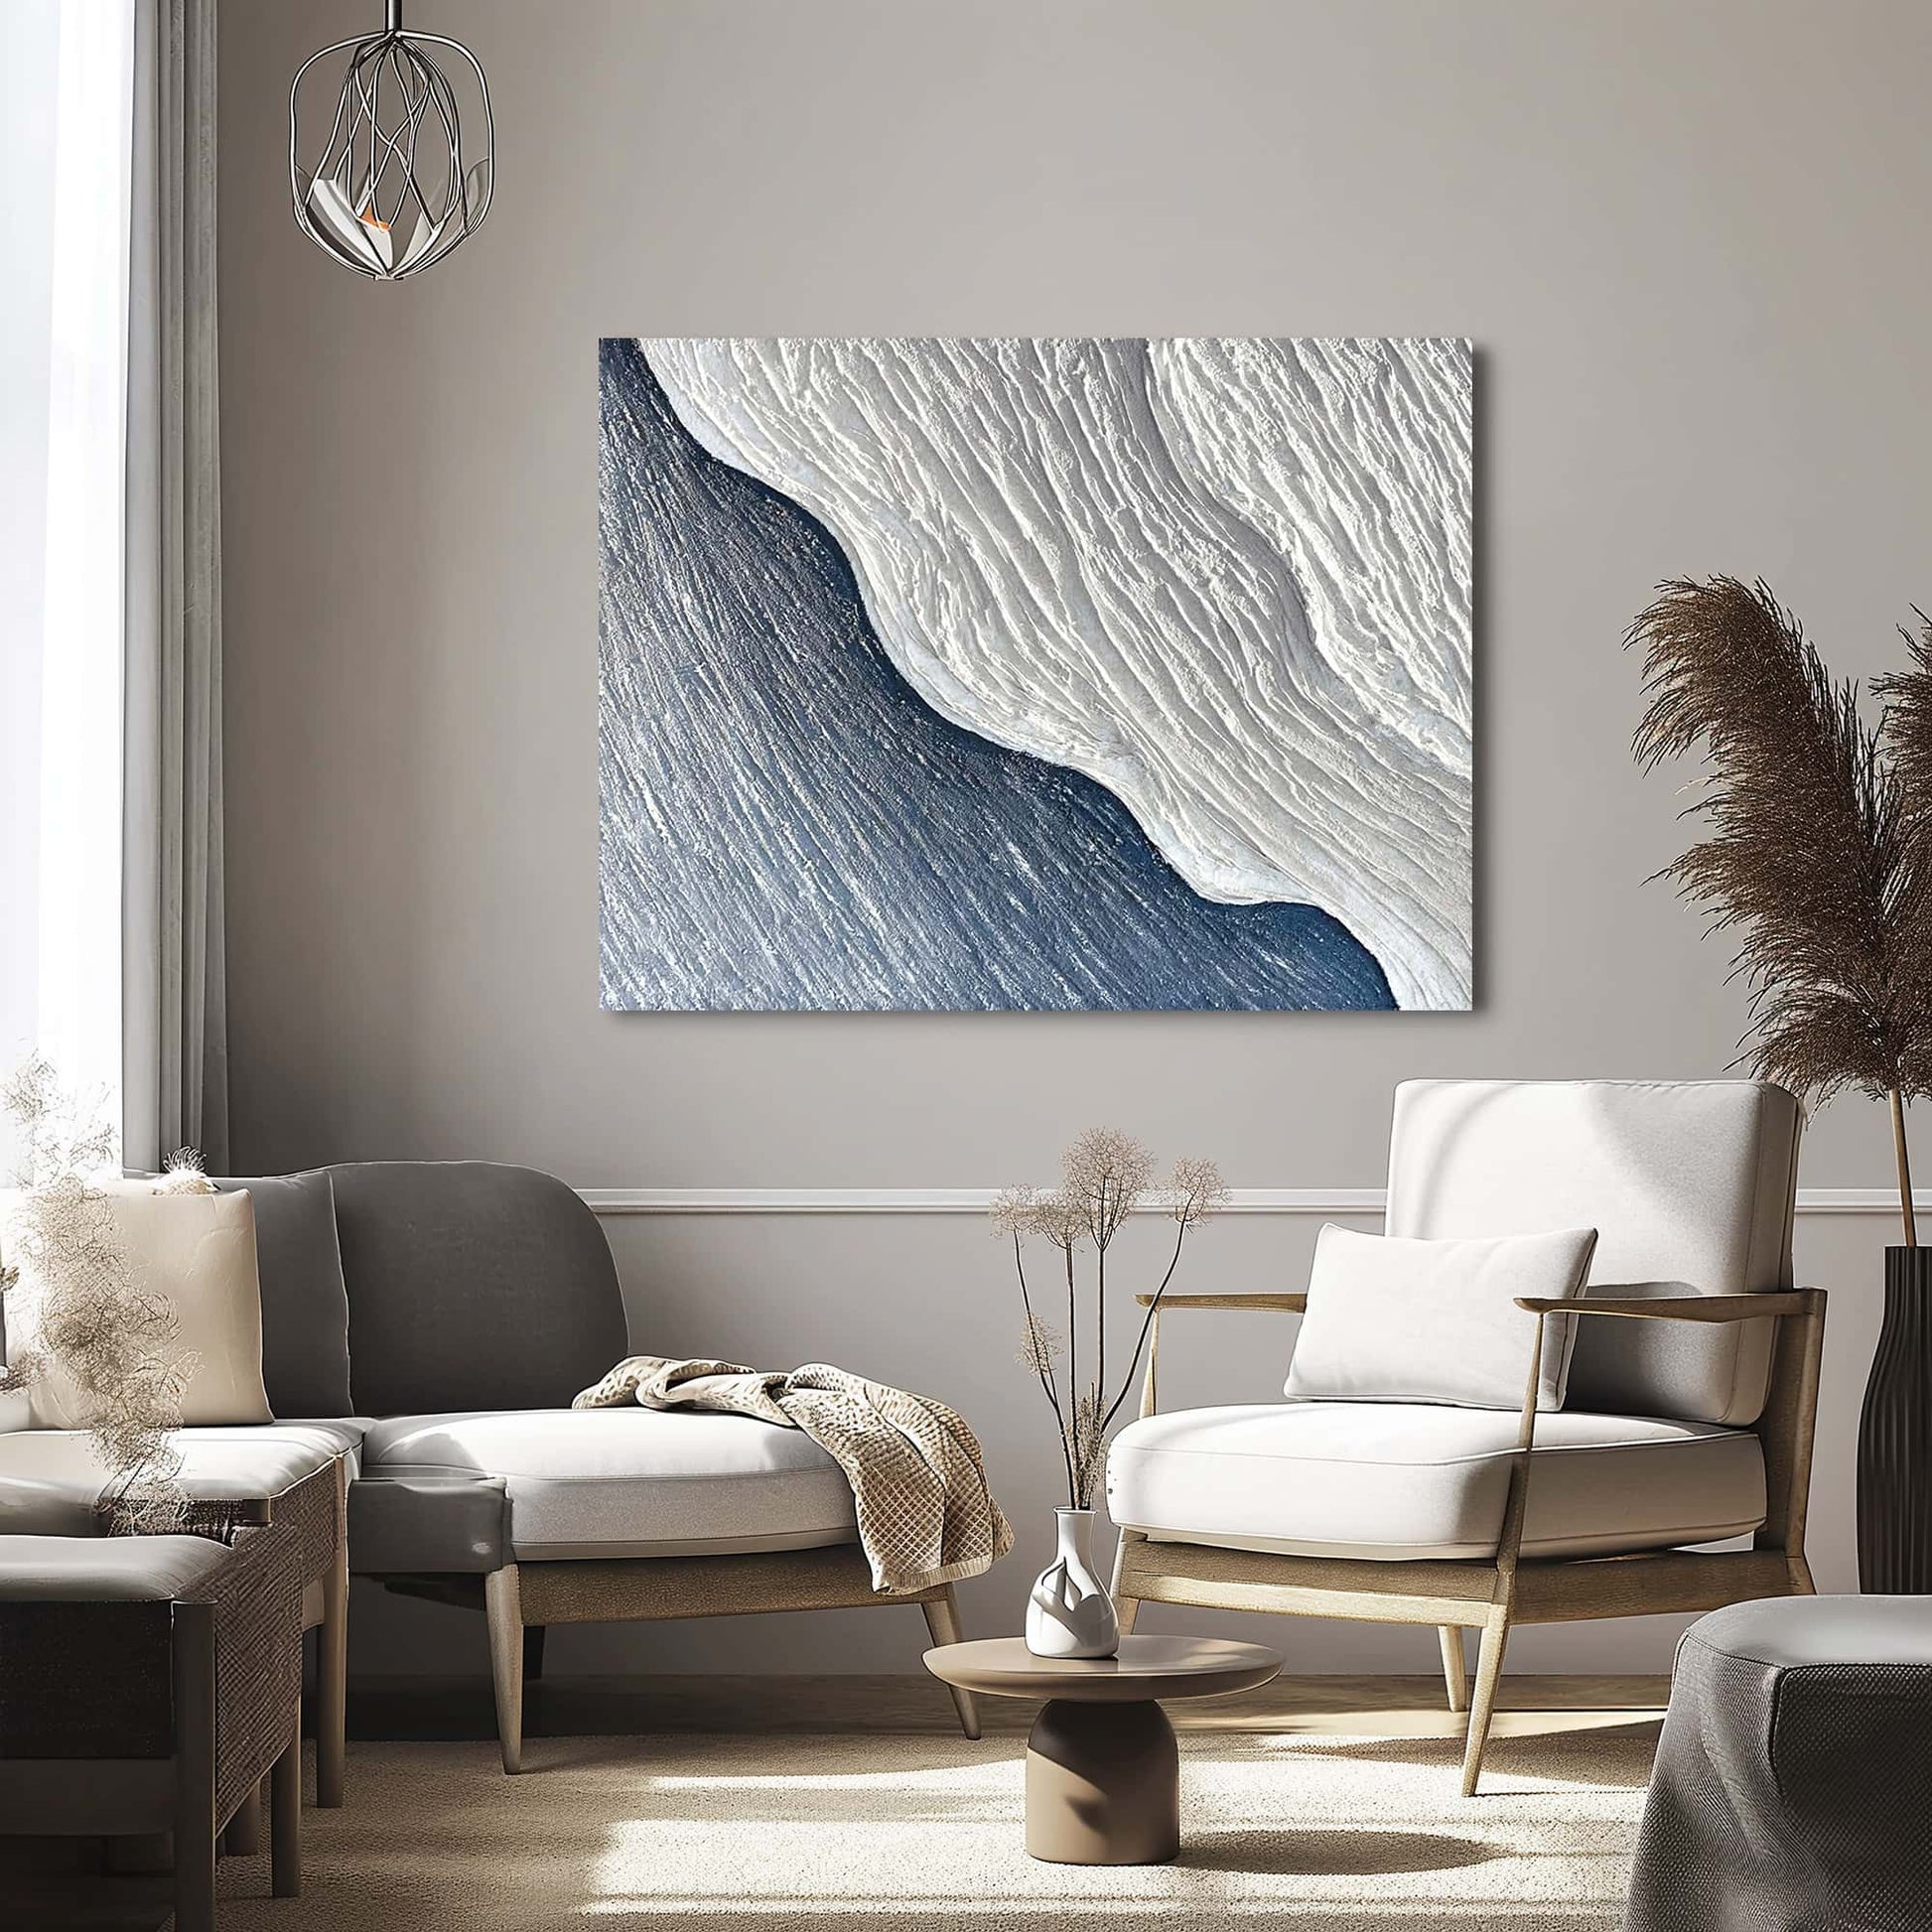 "Hand-painted abstract textured wall art titled 'ANTARCTIC COAST.' This versatile artwork, suitable for both portrait and landscape orientations, depicts an abstract representation of the Antarctic coast with a colour palette dominated by navy and white, hanging in the living room."